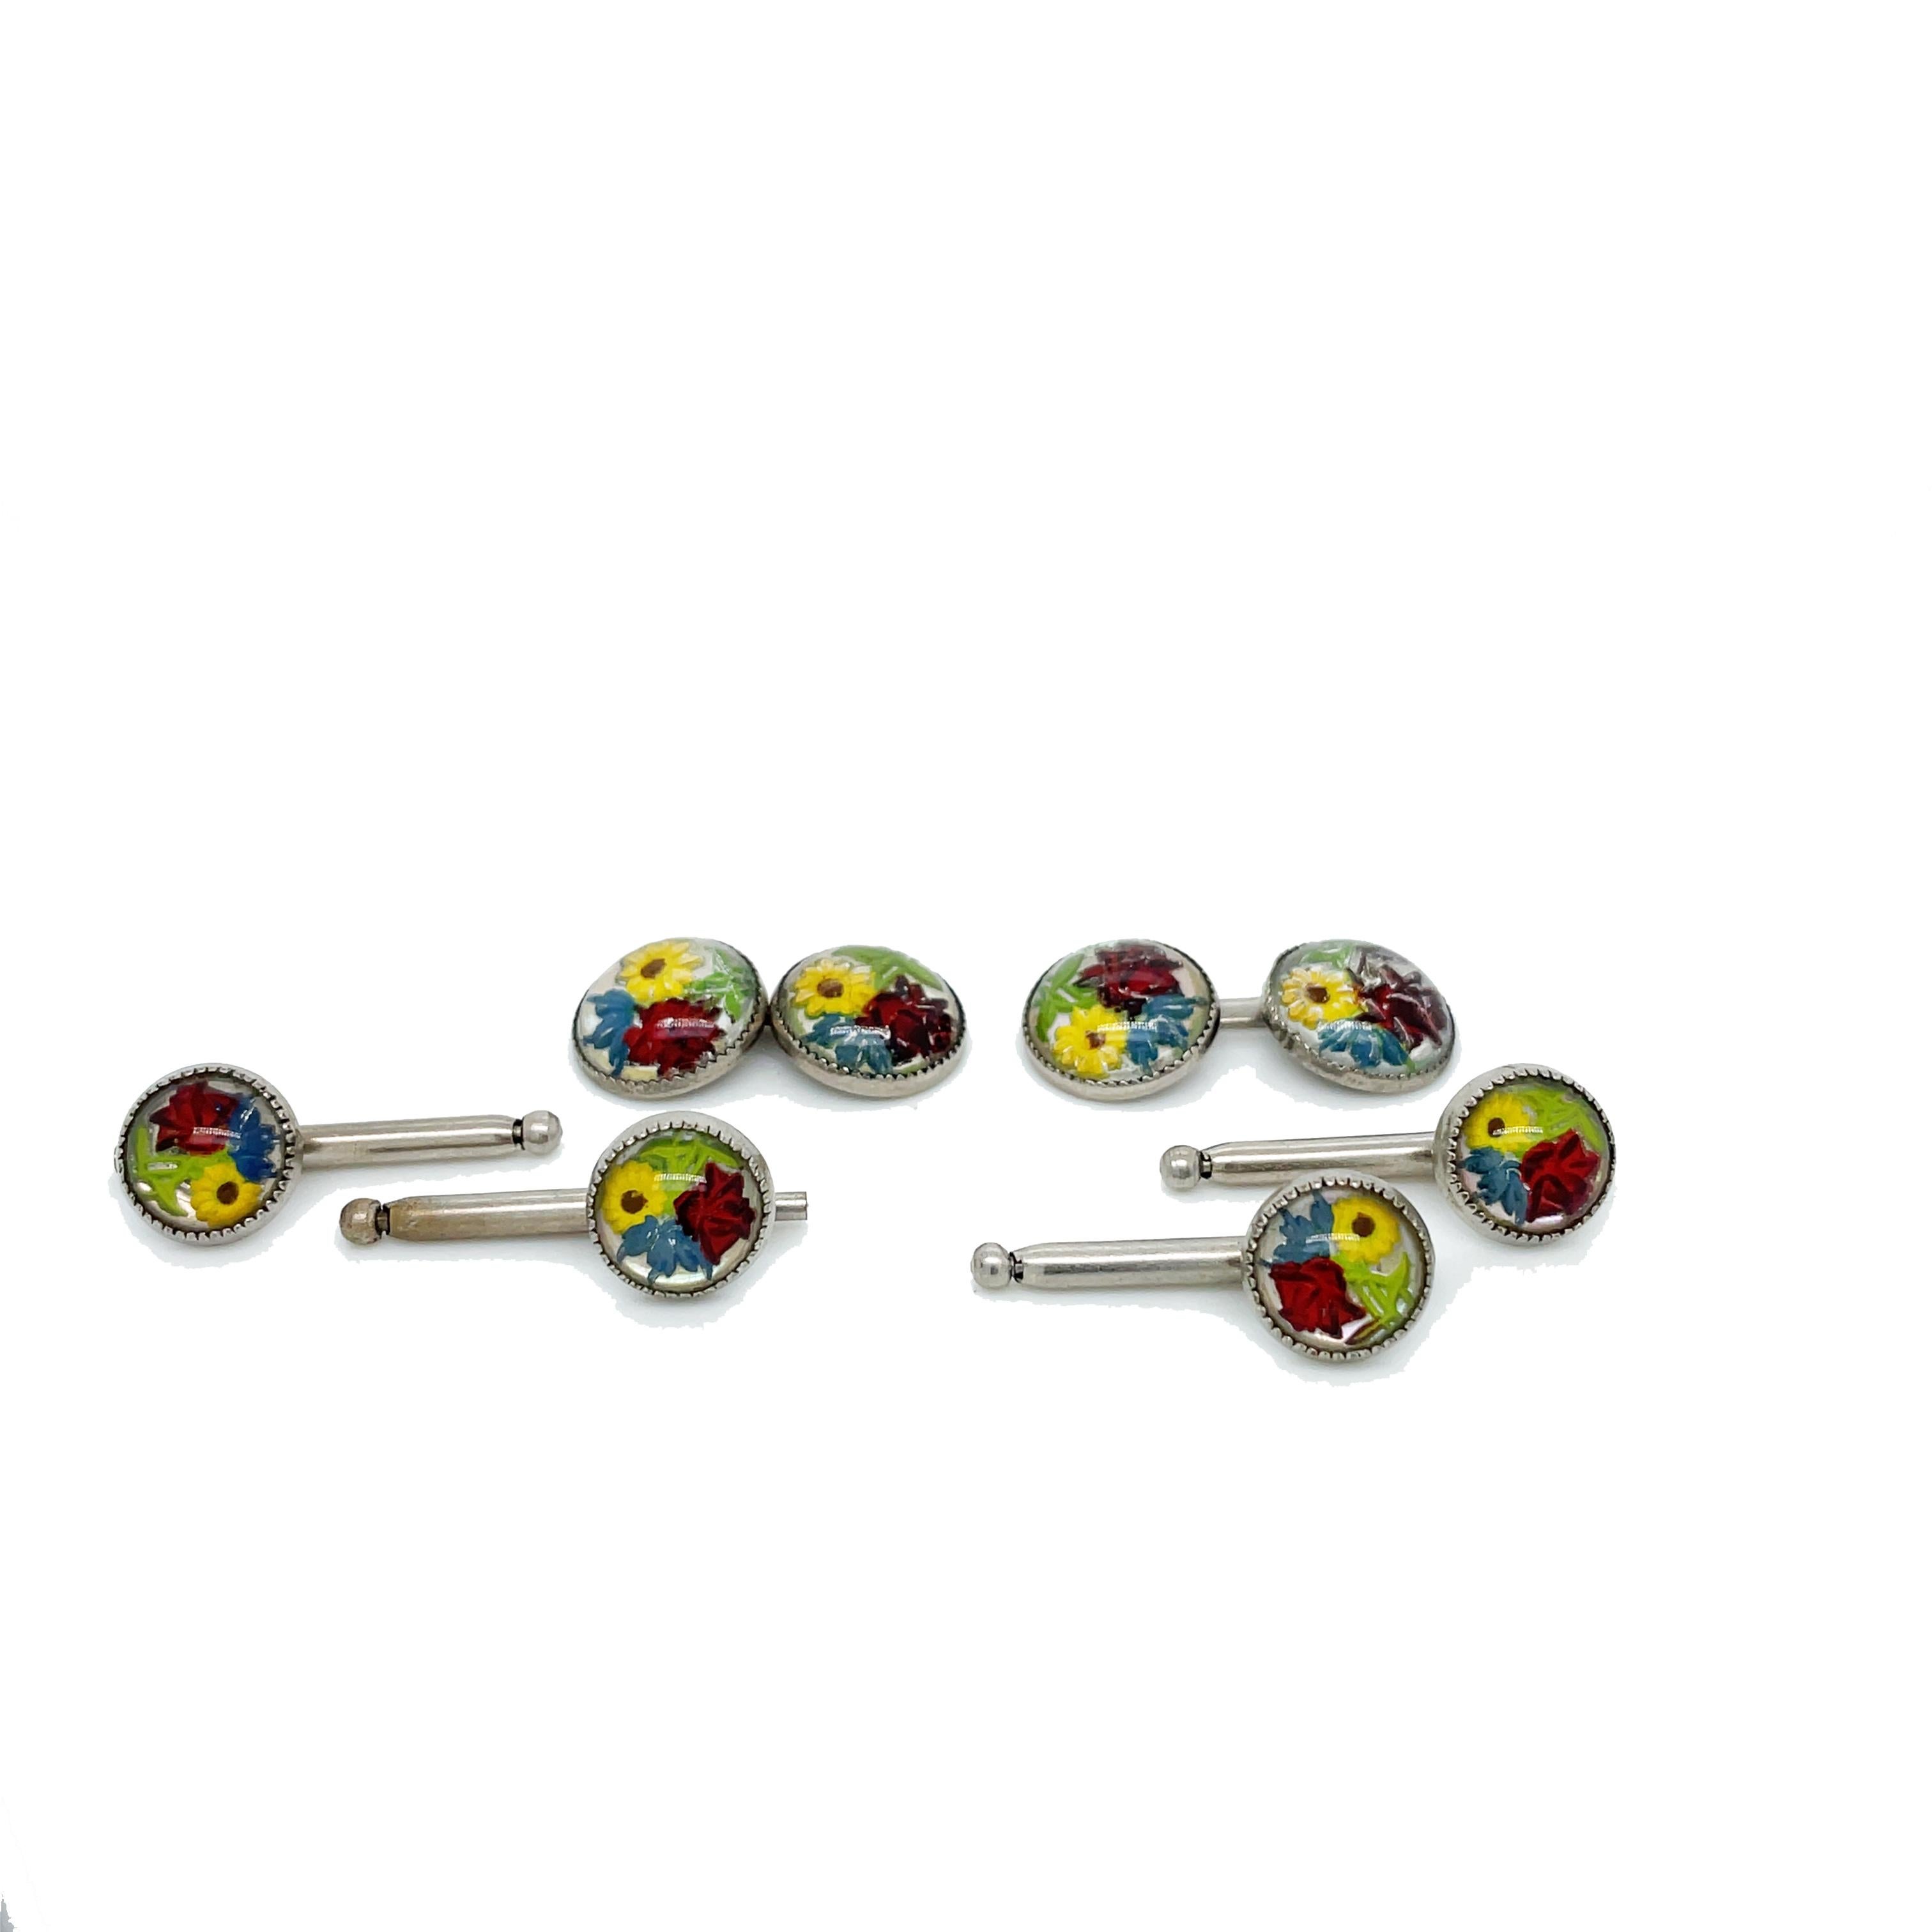 This is a stellar Edwardian 8-piece stud set that features a vibrant, unique, and fun pressed glass floral design! This spectacular set from the Edwardian era is crafted in genuine sterling silver. The face of each stud and cufflink is adorned with